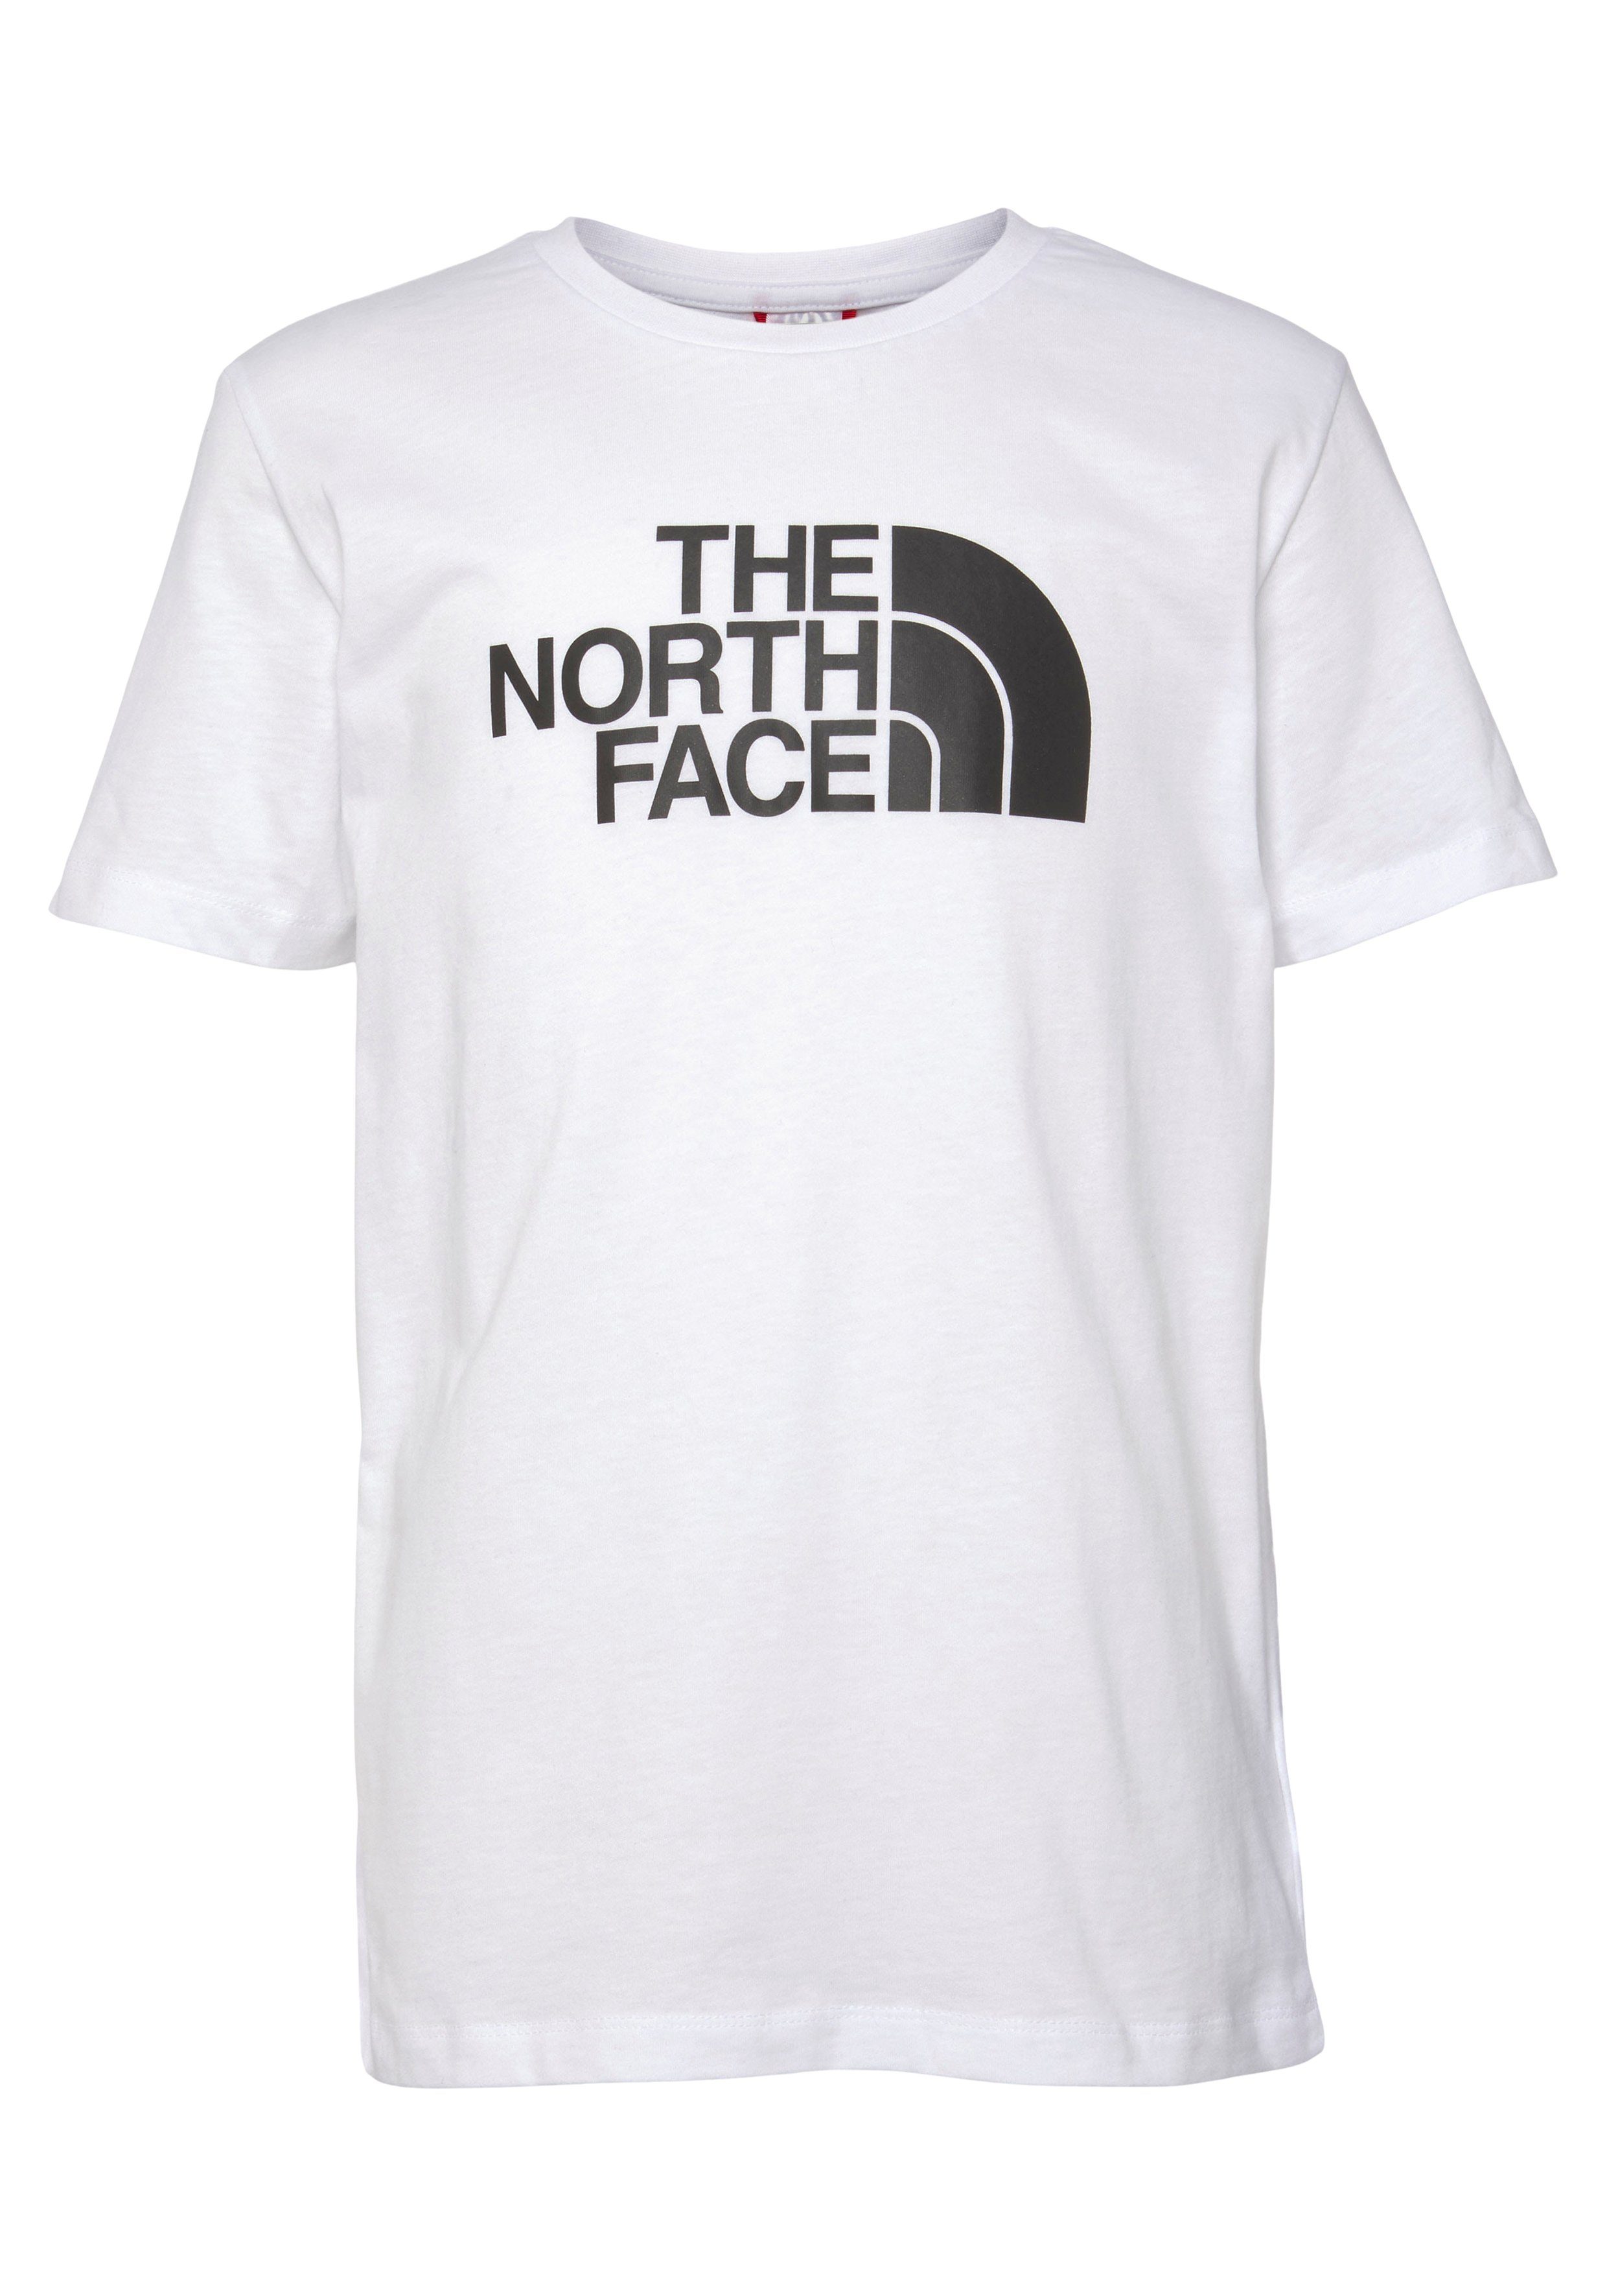 The North Face T-Shirt EASY white TEE Kinder für 